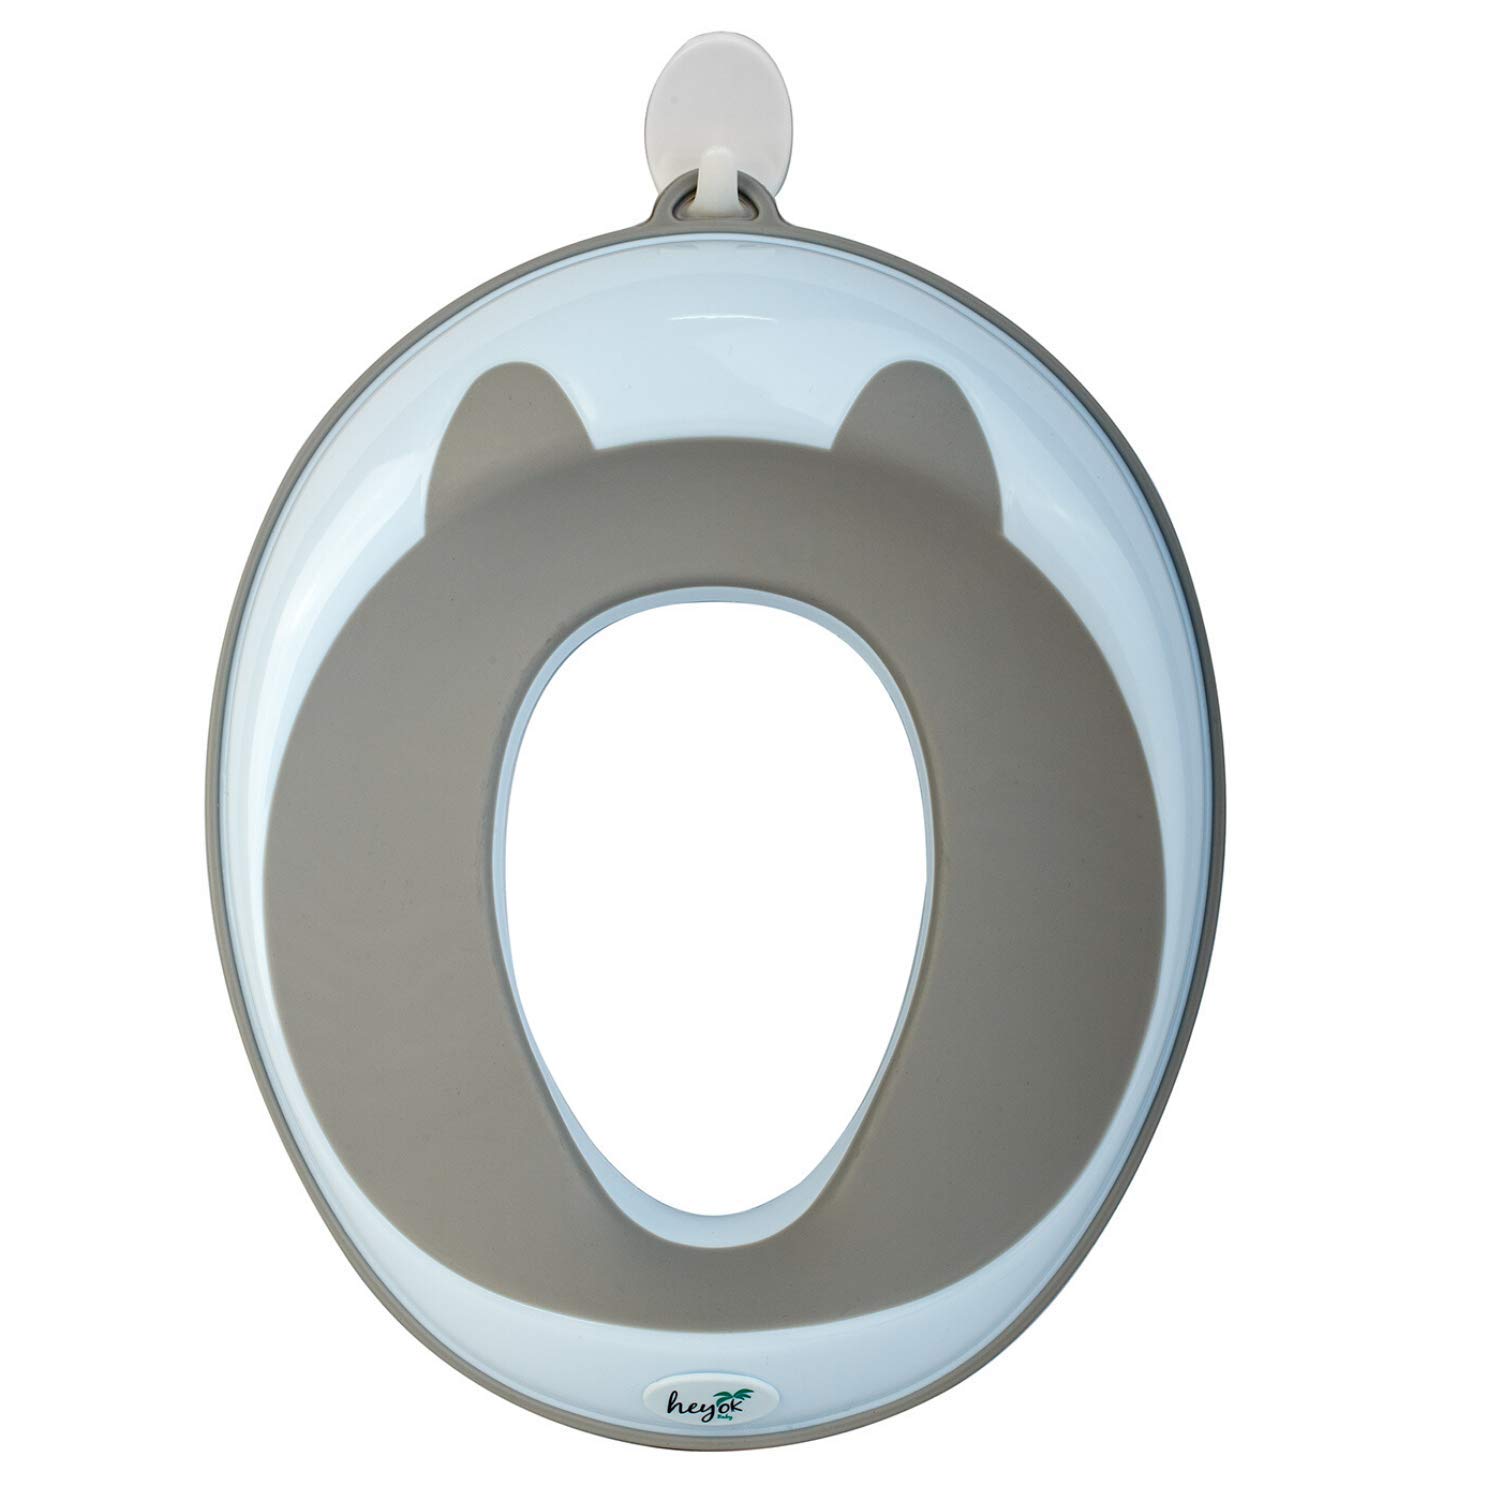 ''HEYOK Baby Potty Training Seat (Mom?s Choice Award Winner) for Kids and Toddlers - Portable RING Ch